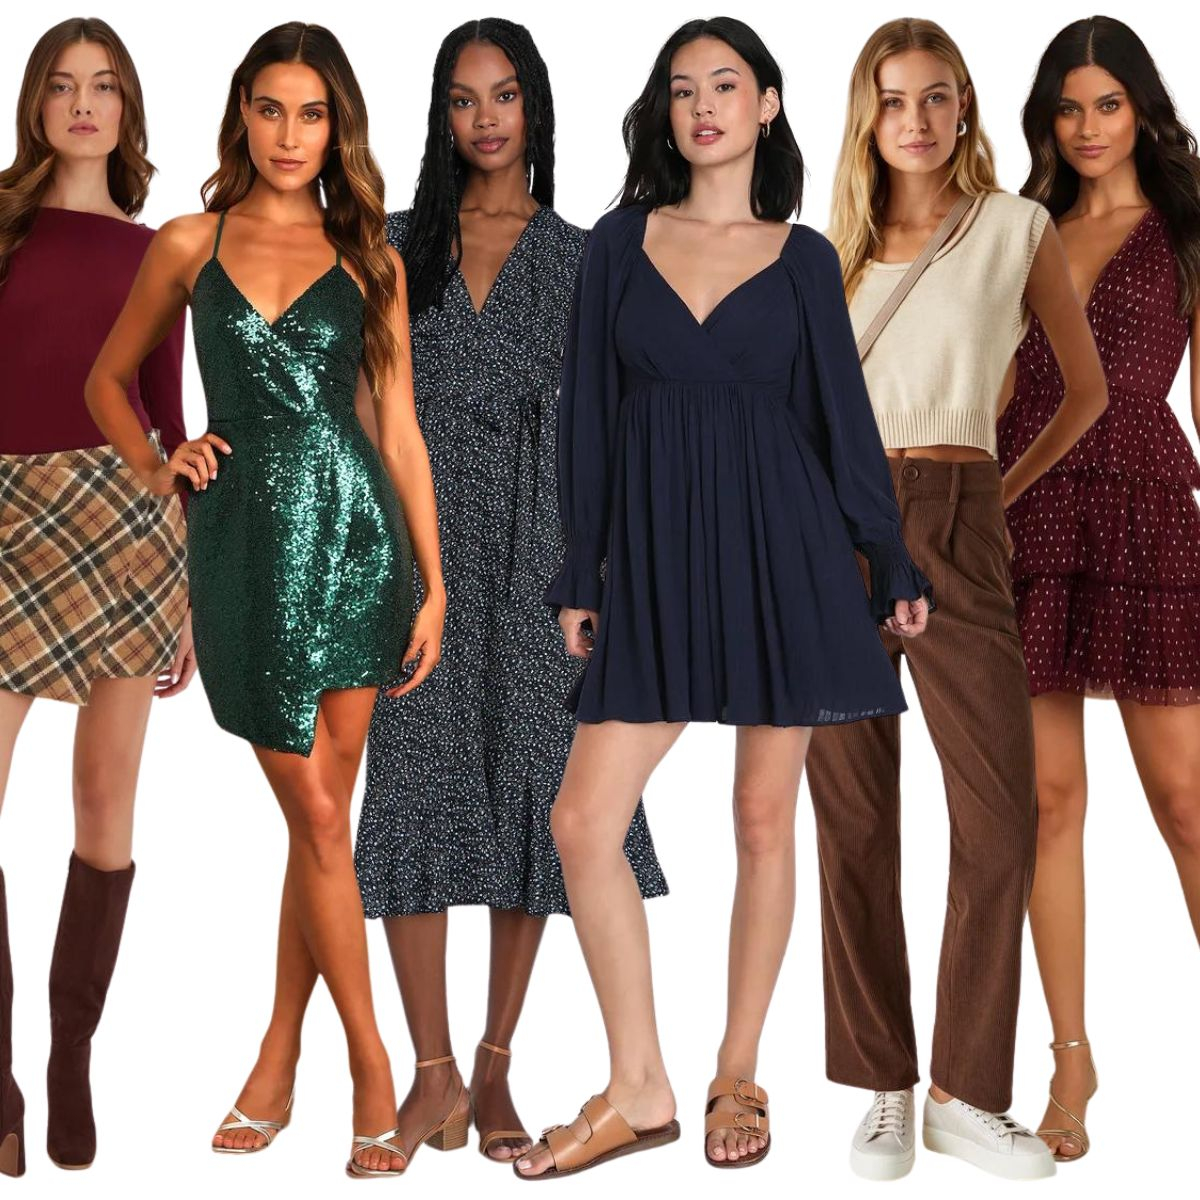 Lulus' End of the Year Sale Shines with $17 Dresses, $11 Tops & More